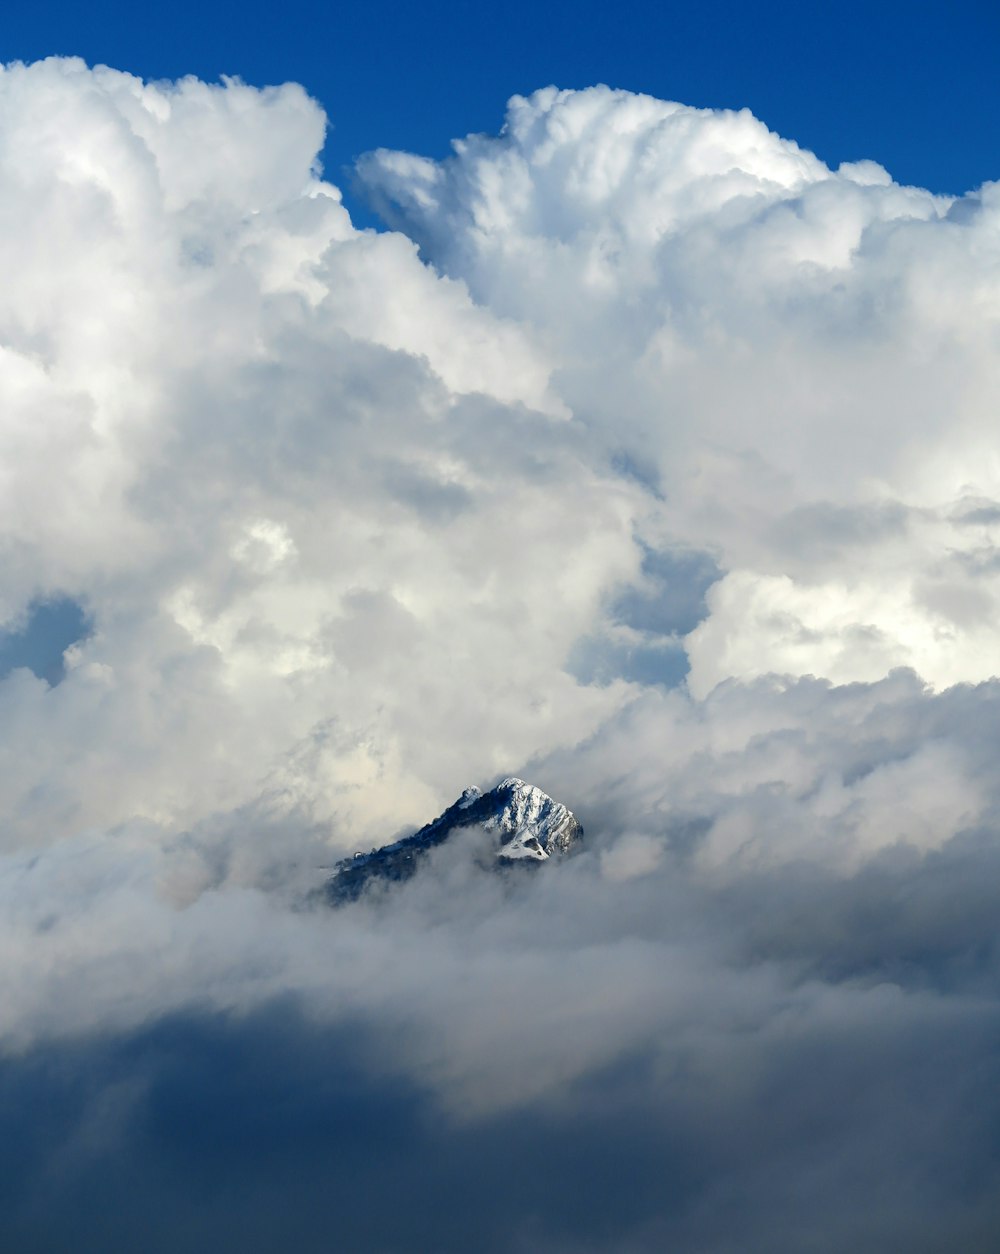 a mountain in the middle of a cloud filled sky